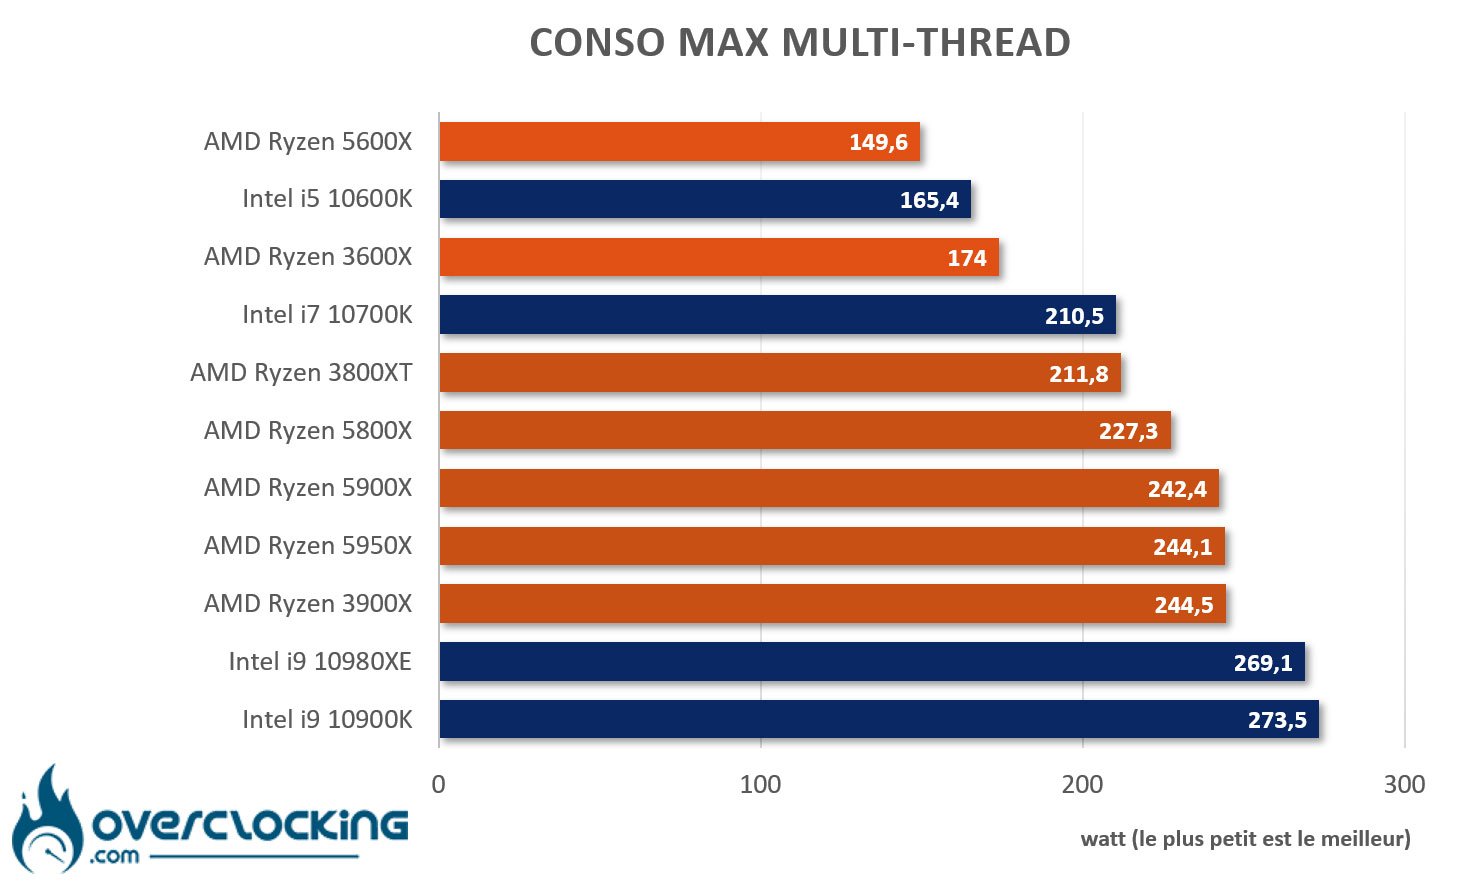 5600X consommation max